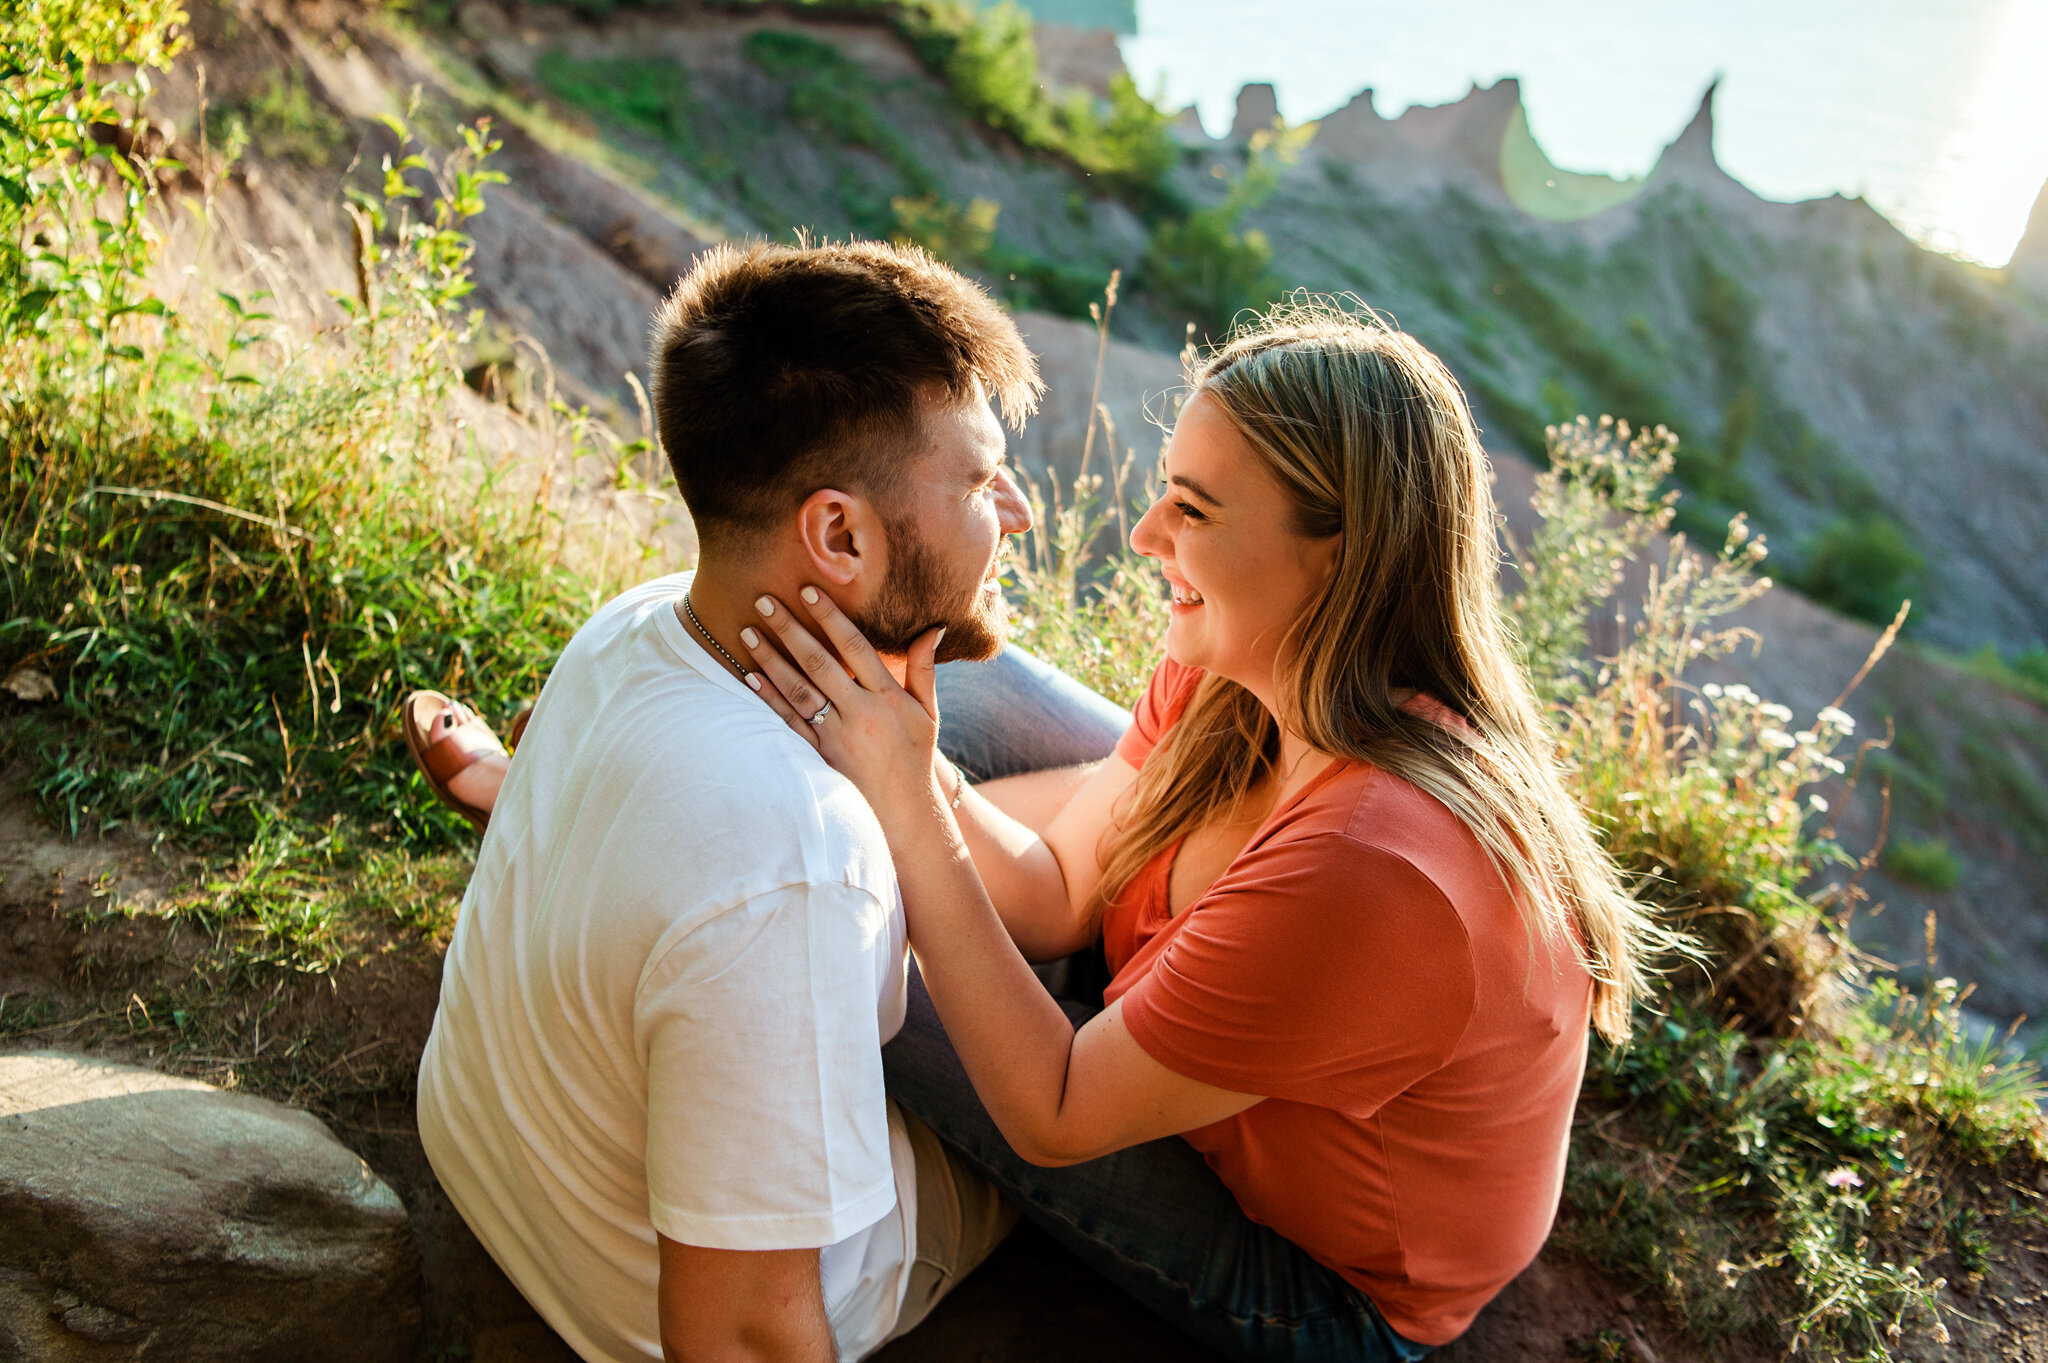 Chimney_Bluffs_State_Park_Rochester_Engagement_Session_JILL_STUDIO_Rochester_NY_Photographer_6915.jpg